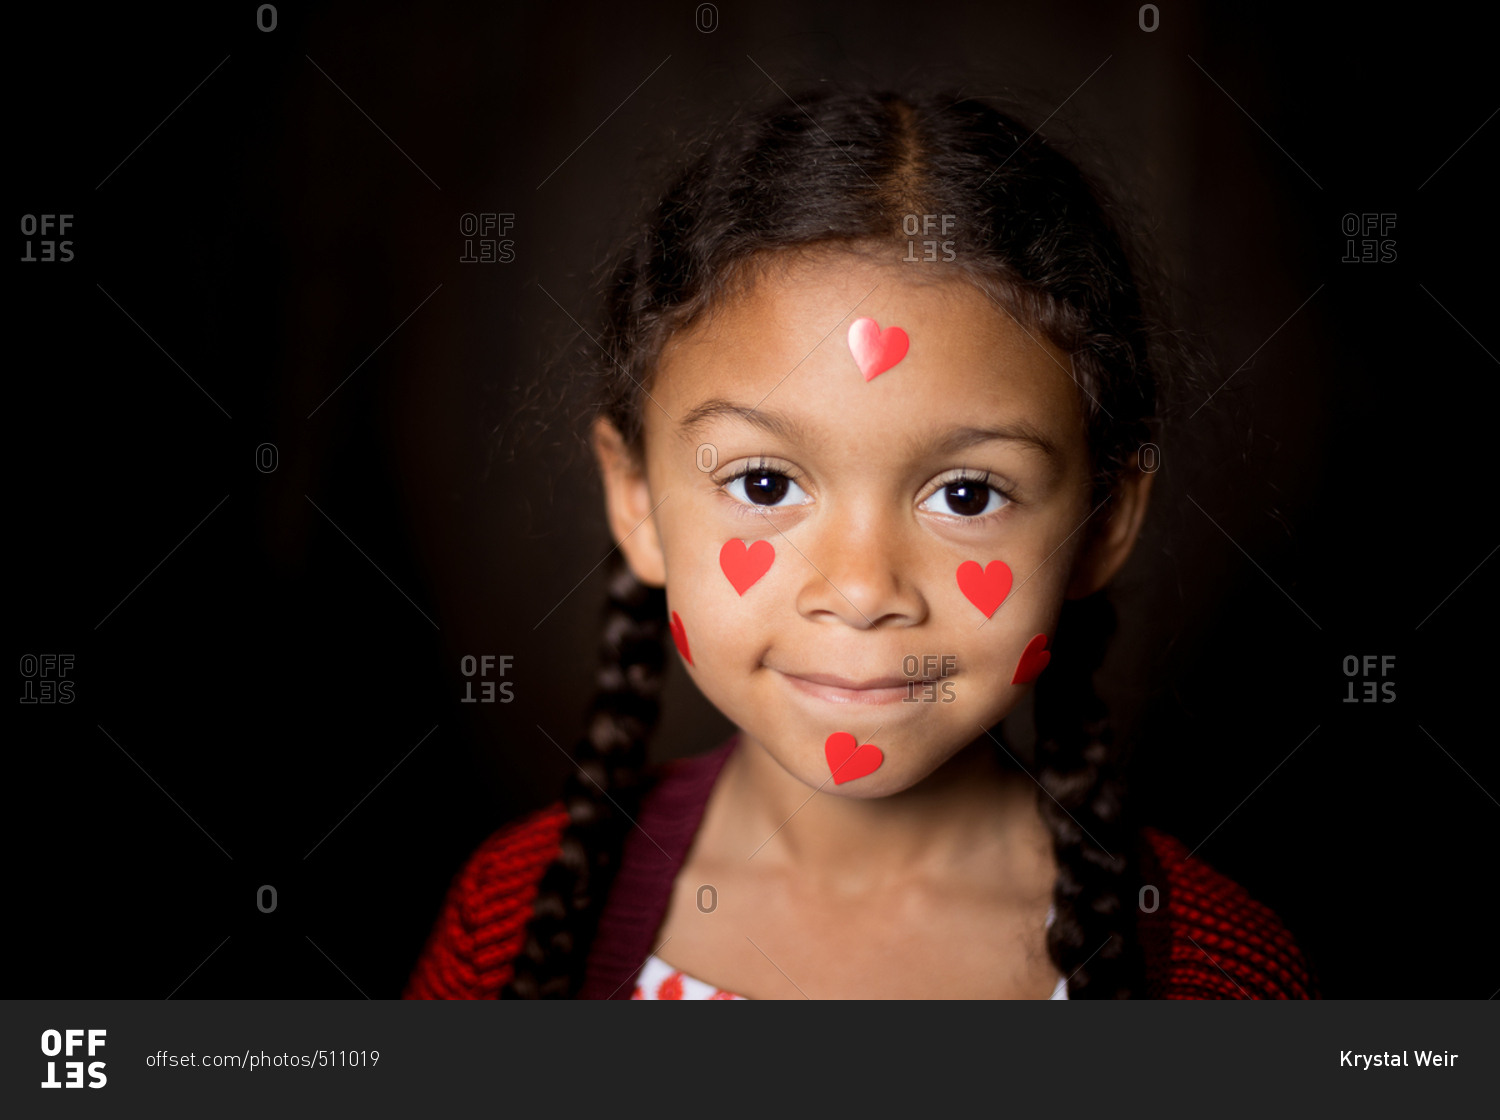 Girl covered in heart stickers